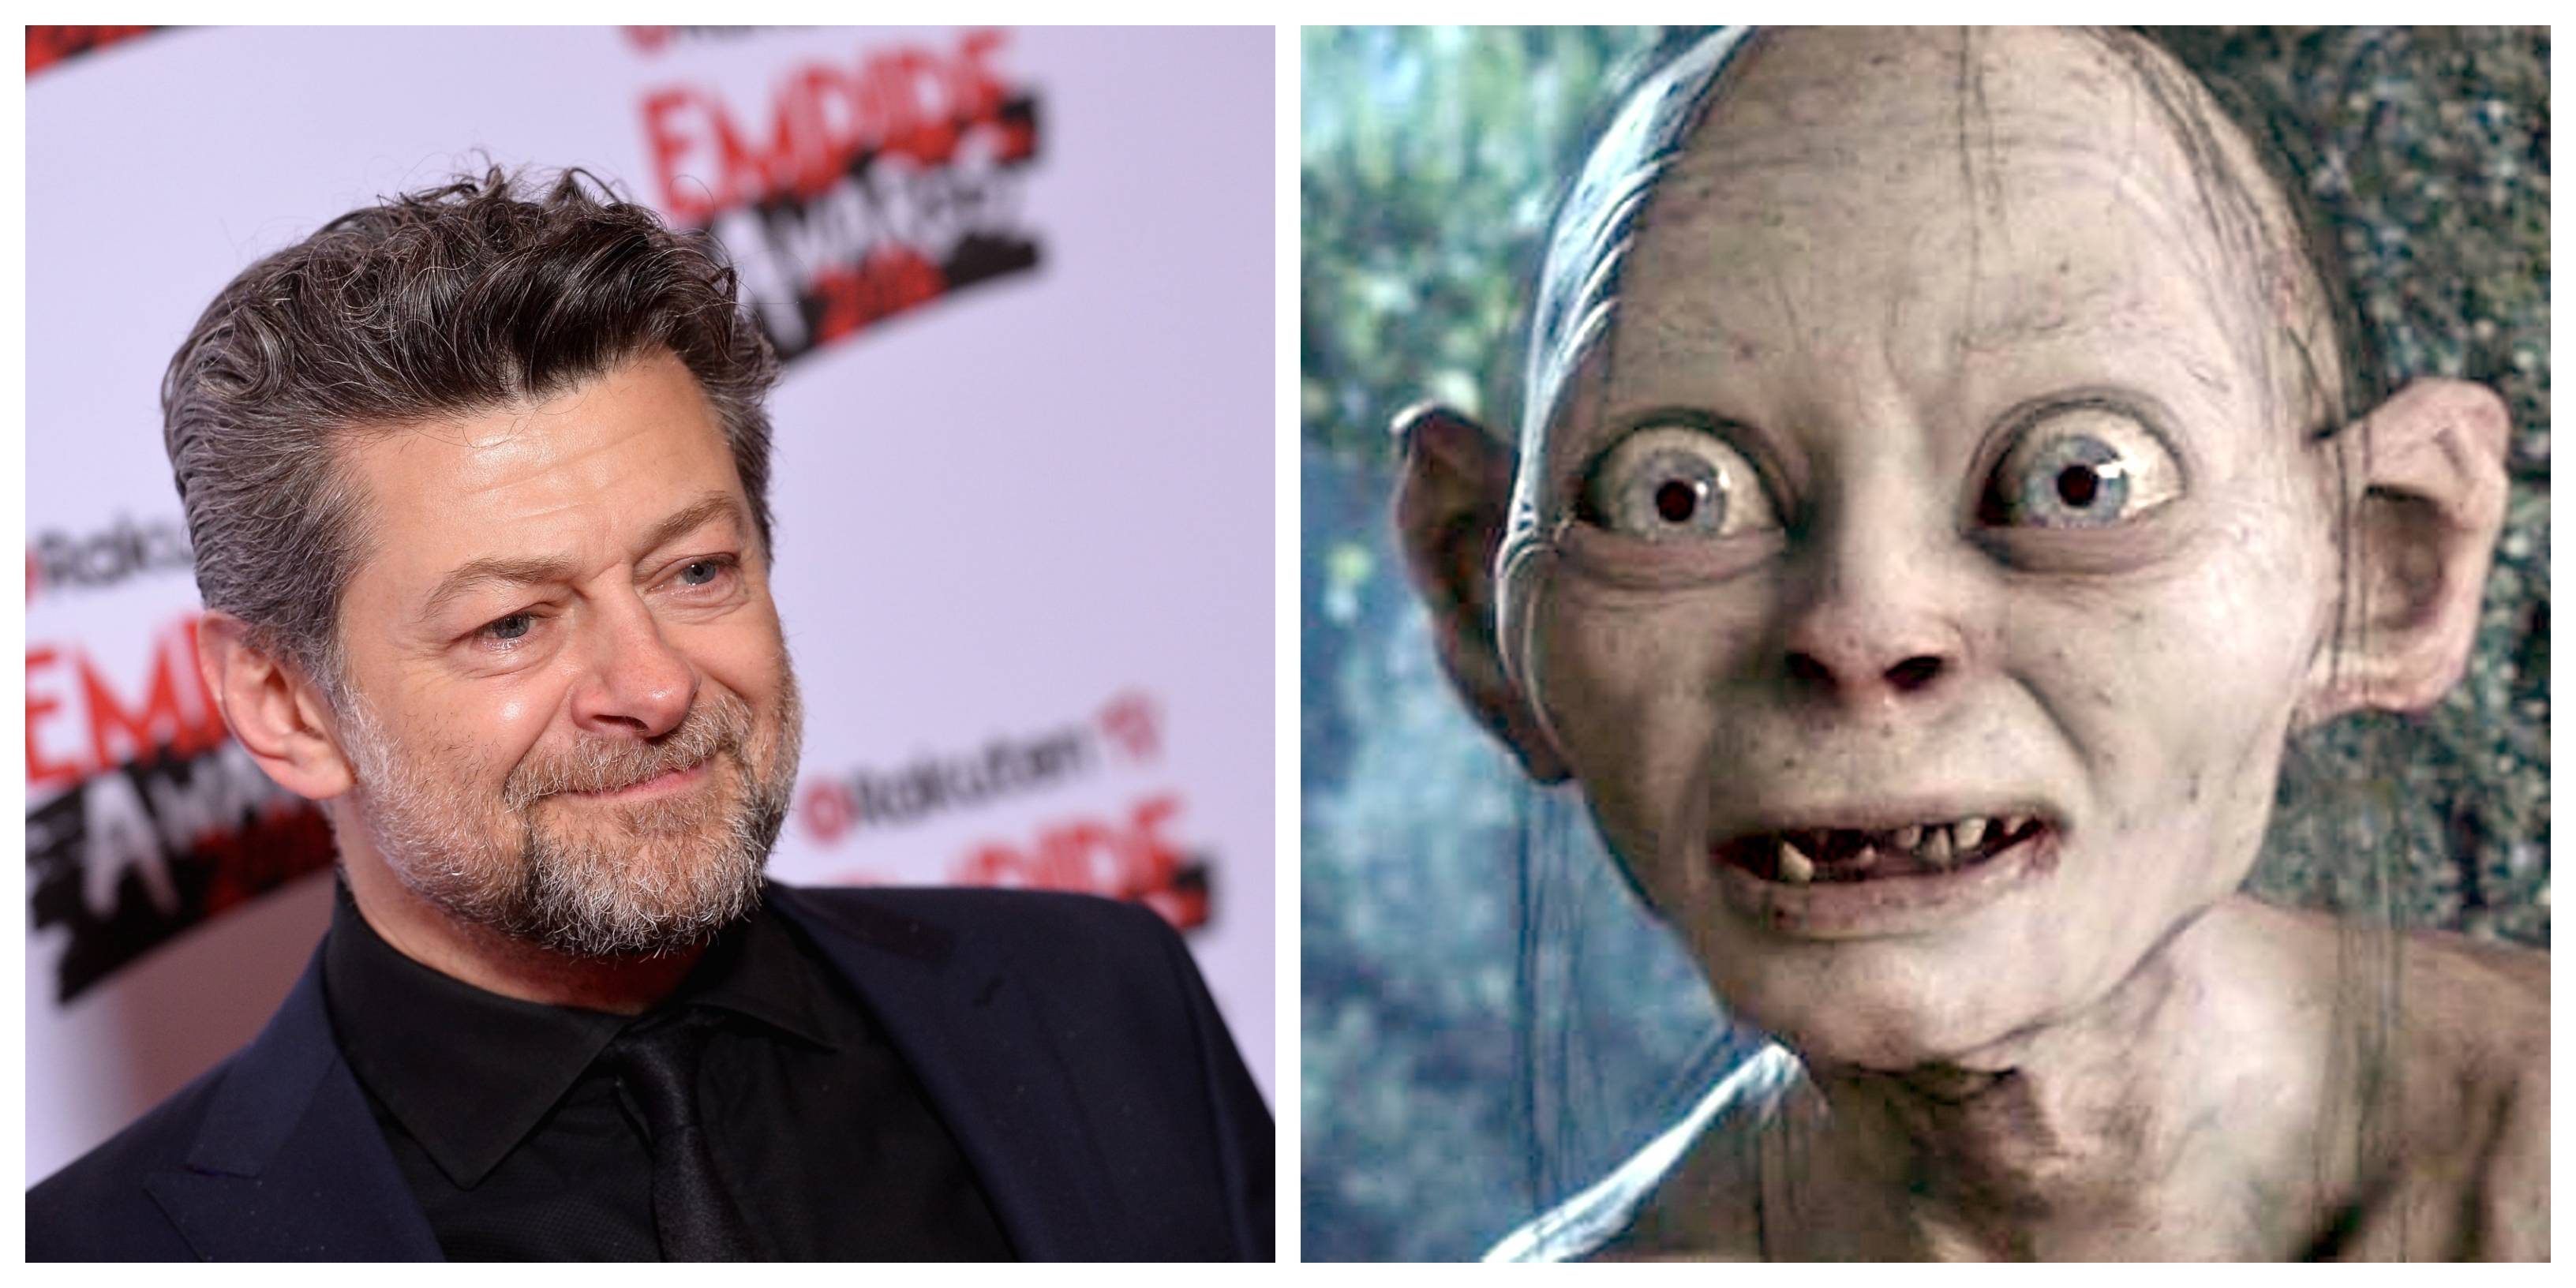 Andy Serkis en zijn Lord of the Rings-personage